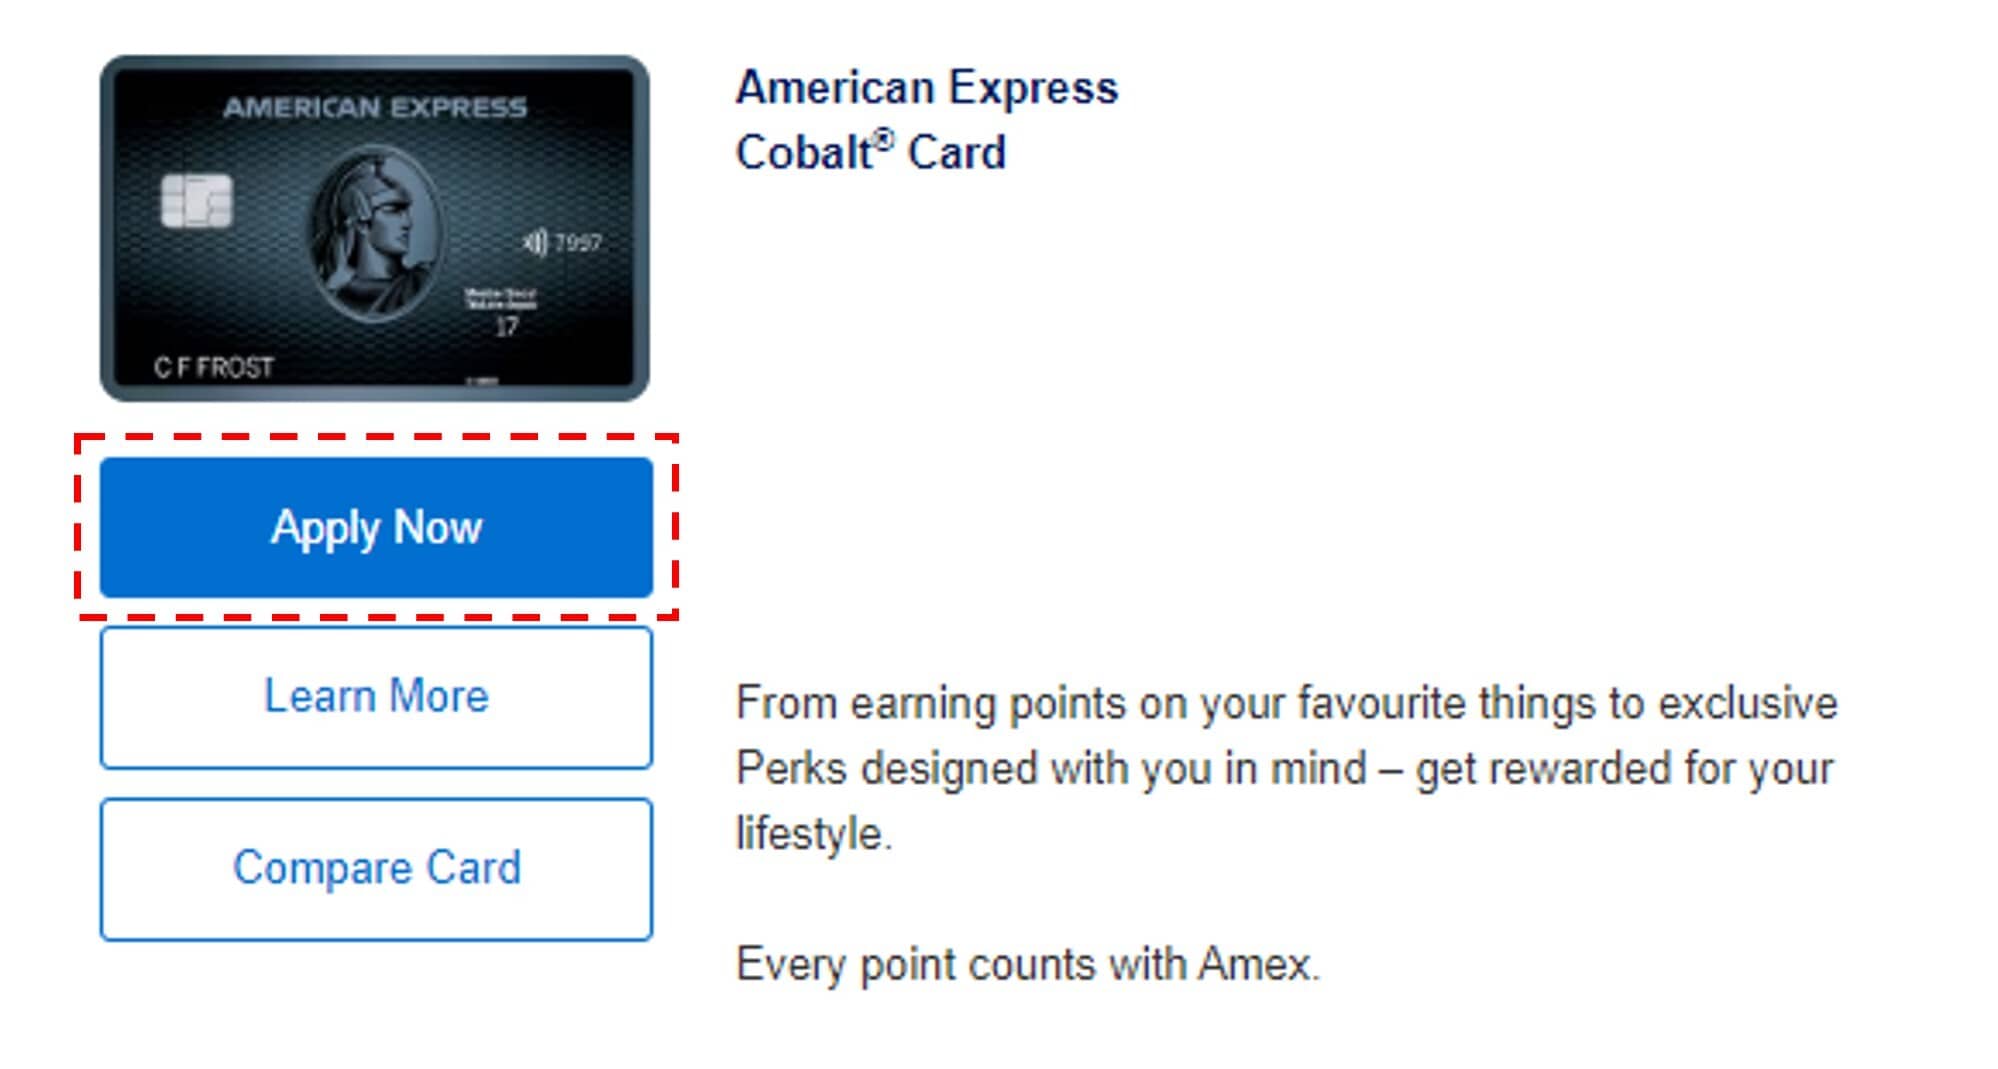 Screenshot of Amex Card application journey with "Apply Now" button circled